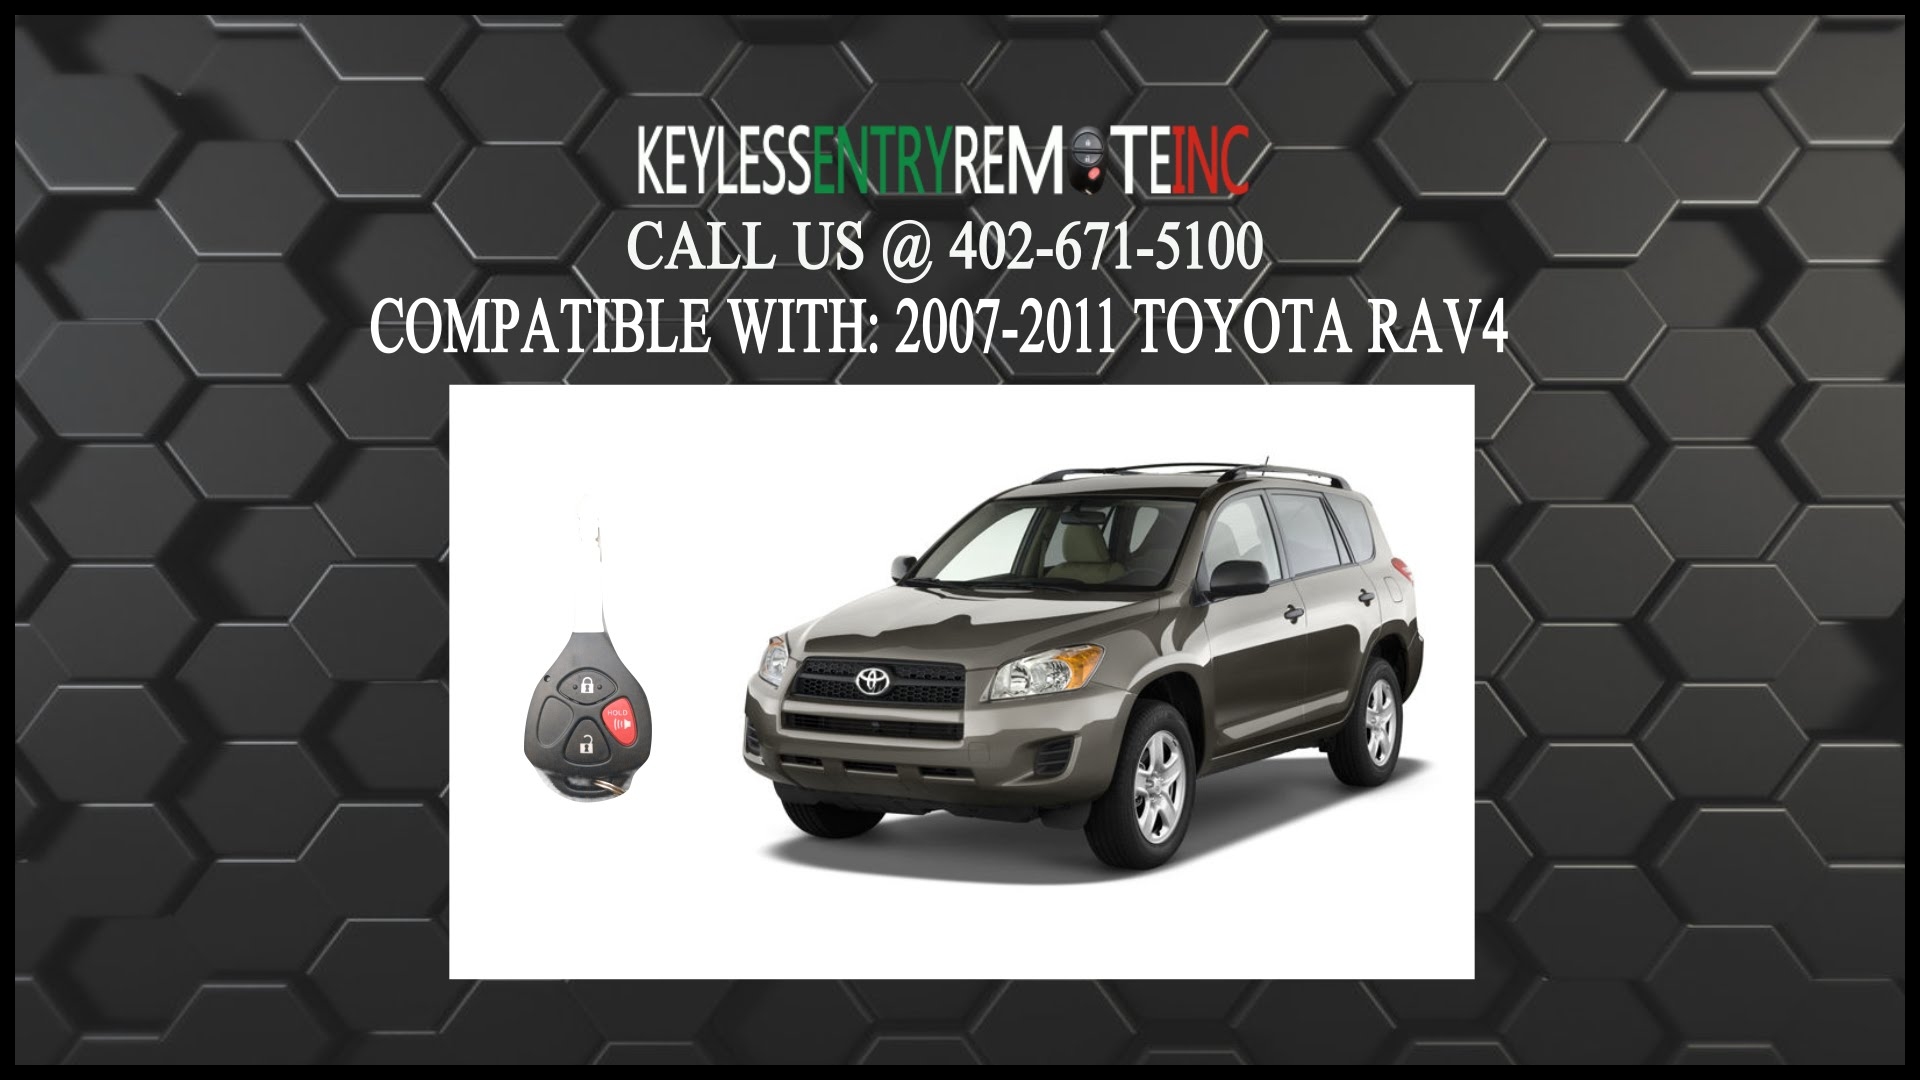 How To Replace Toyota Rav4 Key Fob Battery 2007 2008 2009 2010 2011